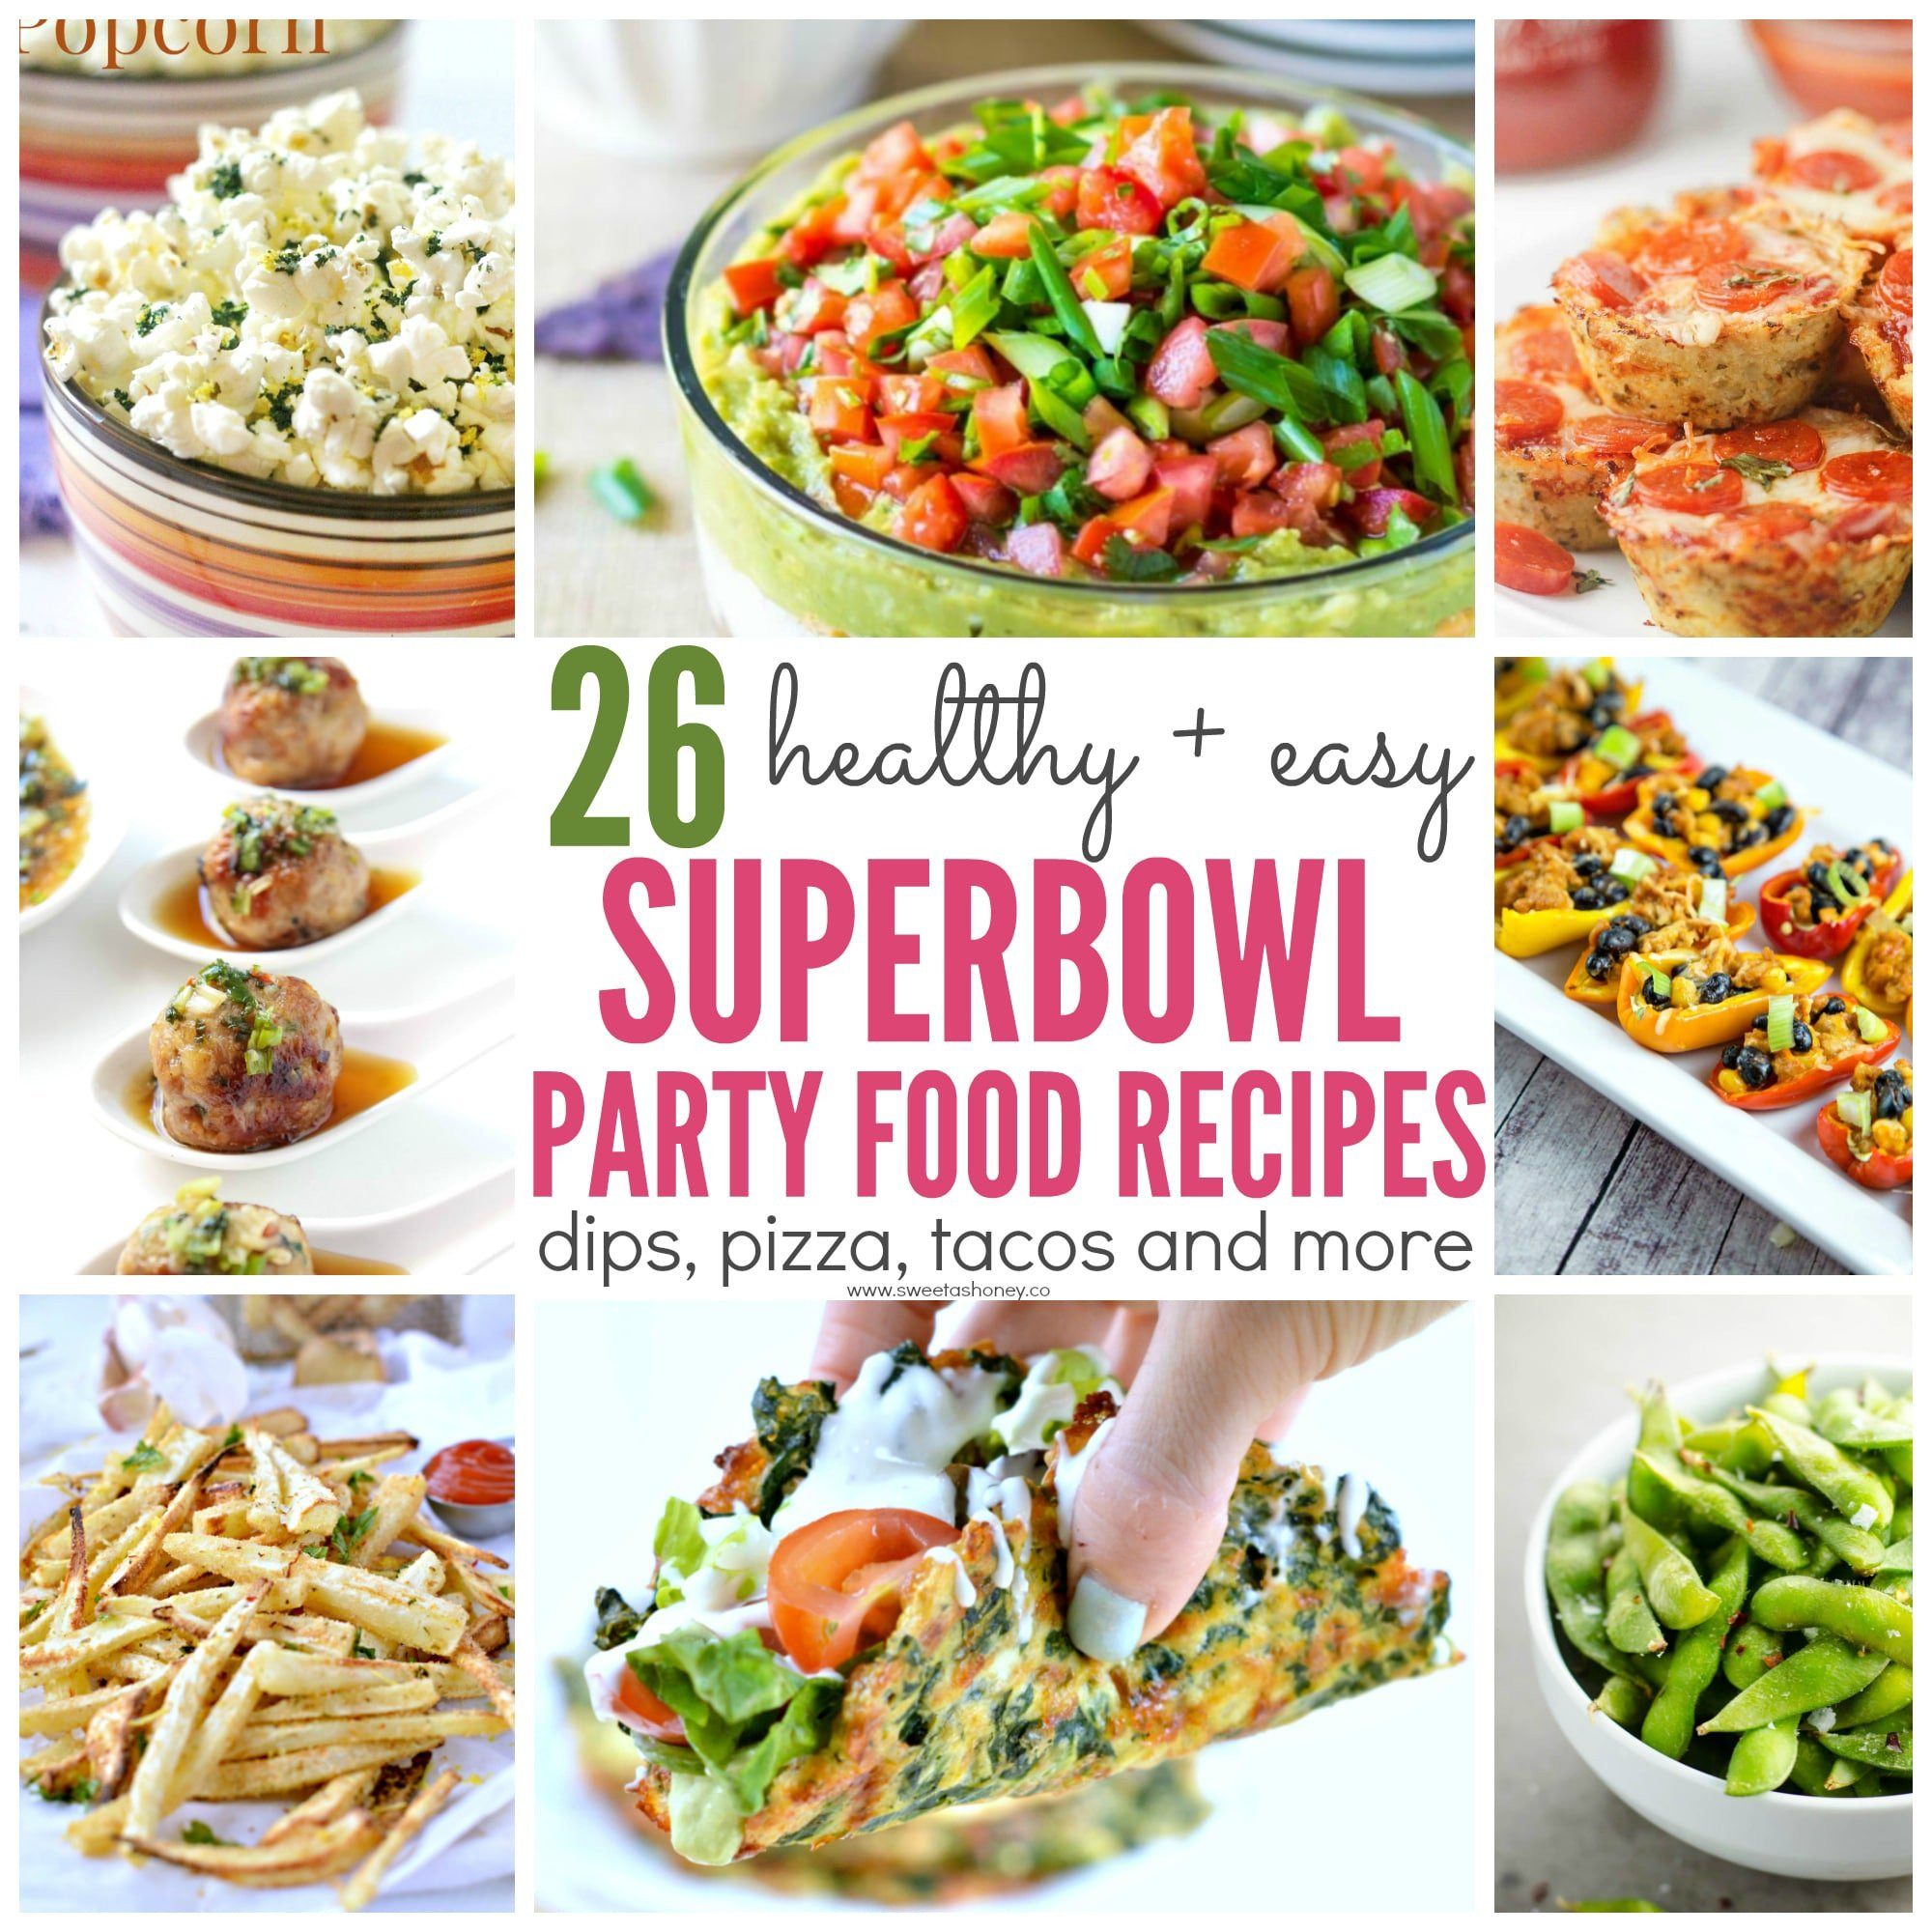 Superbowl Snacks Recipes
 26 Healthy Superbowl Party Food Recipes Sweet and Savory